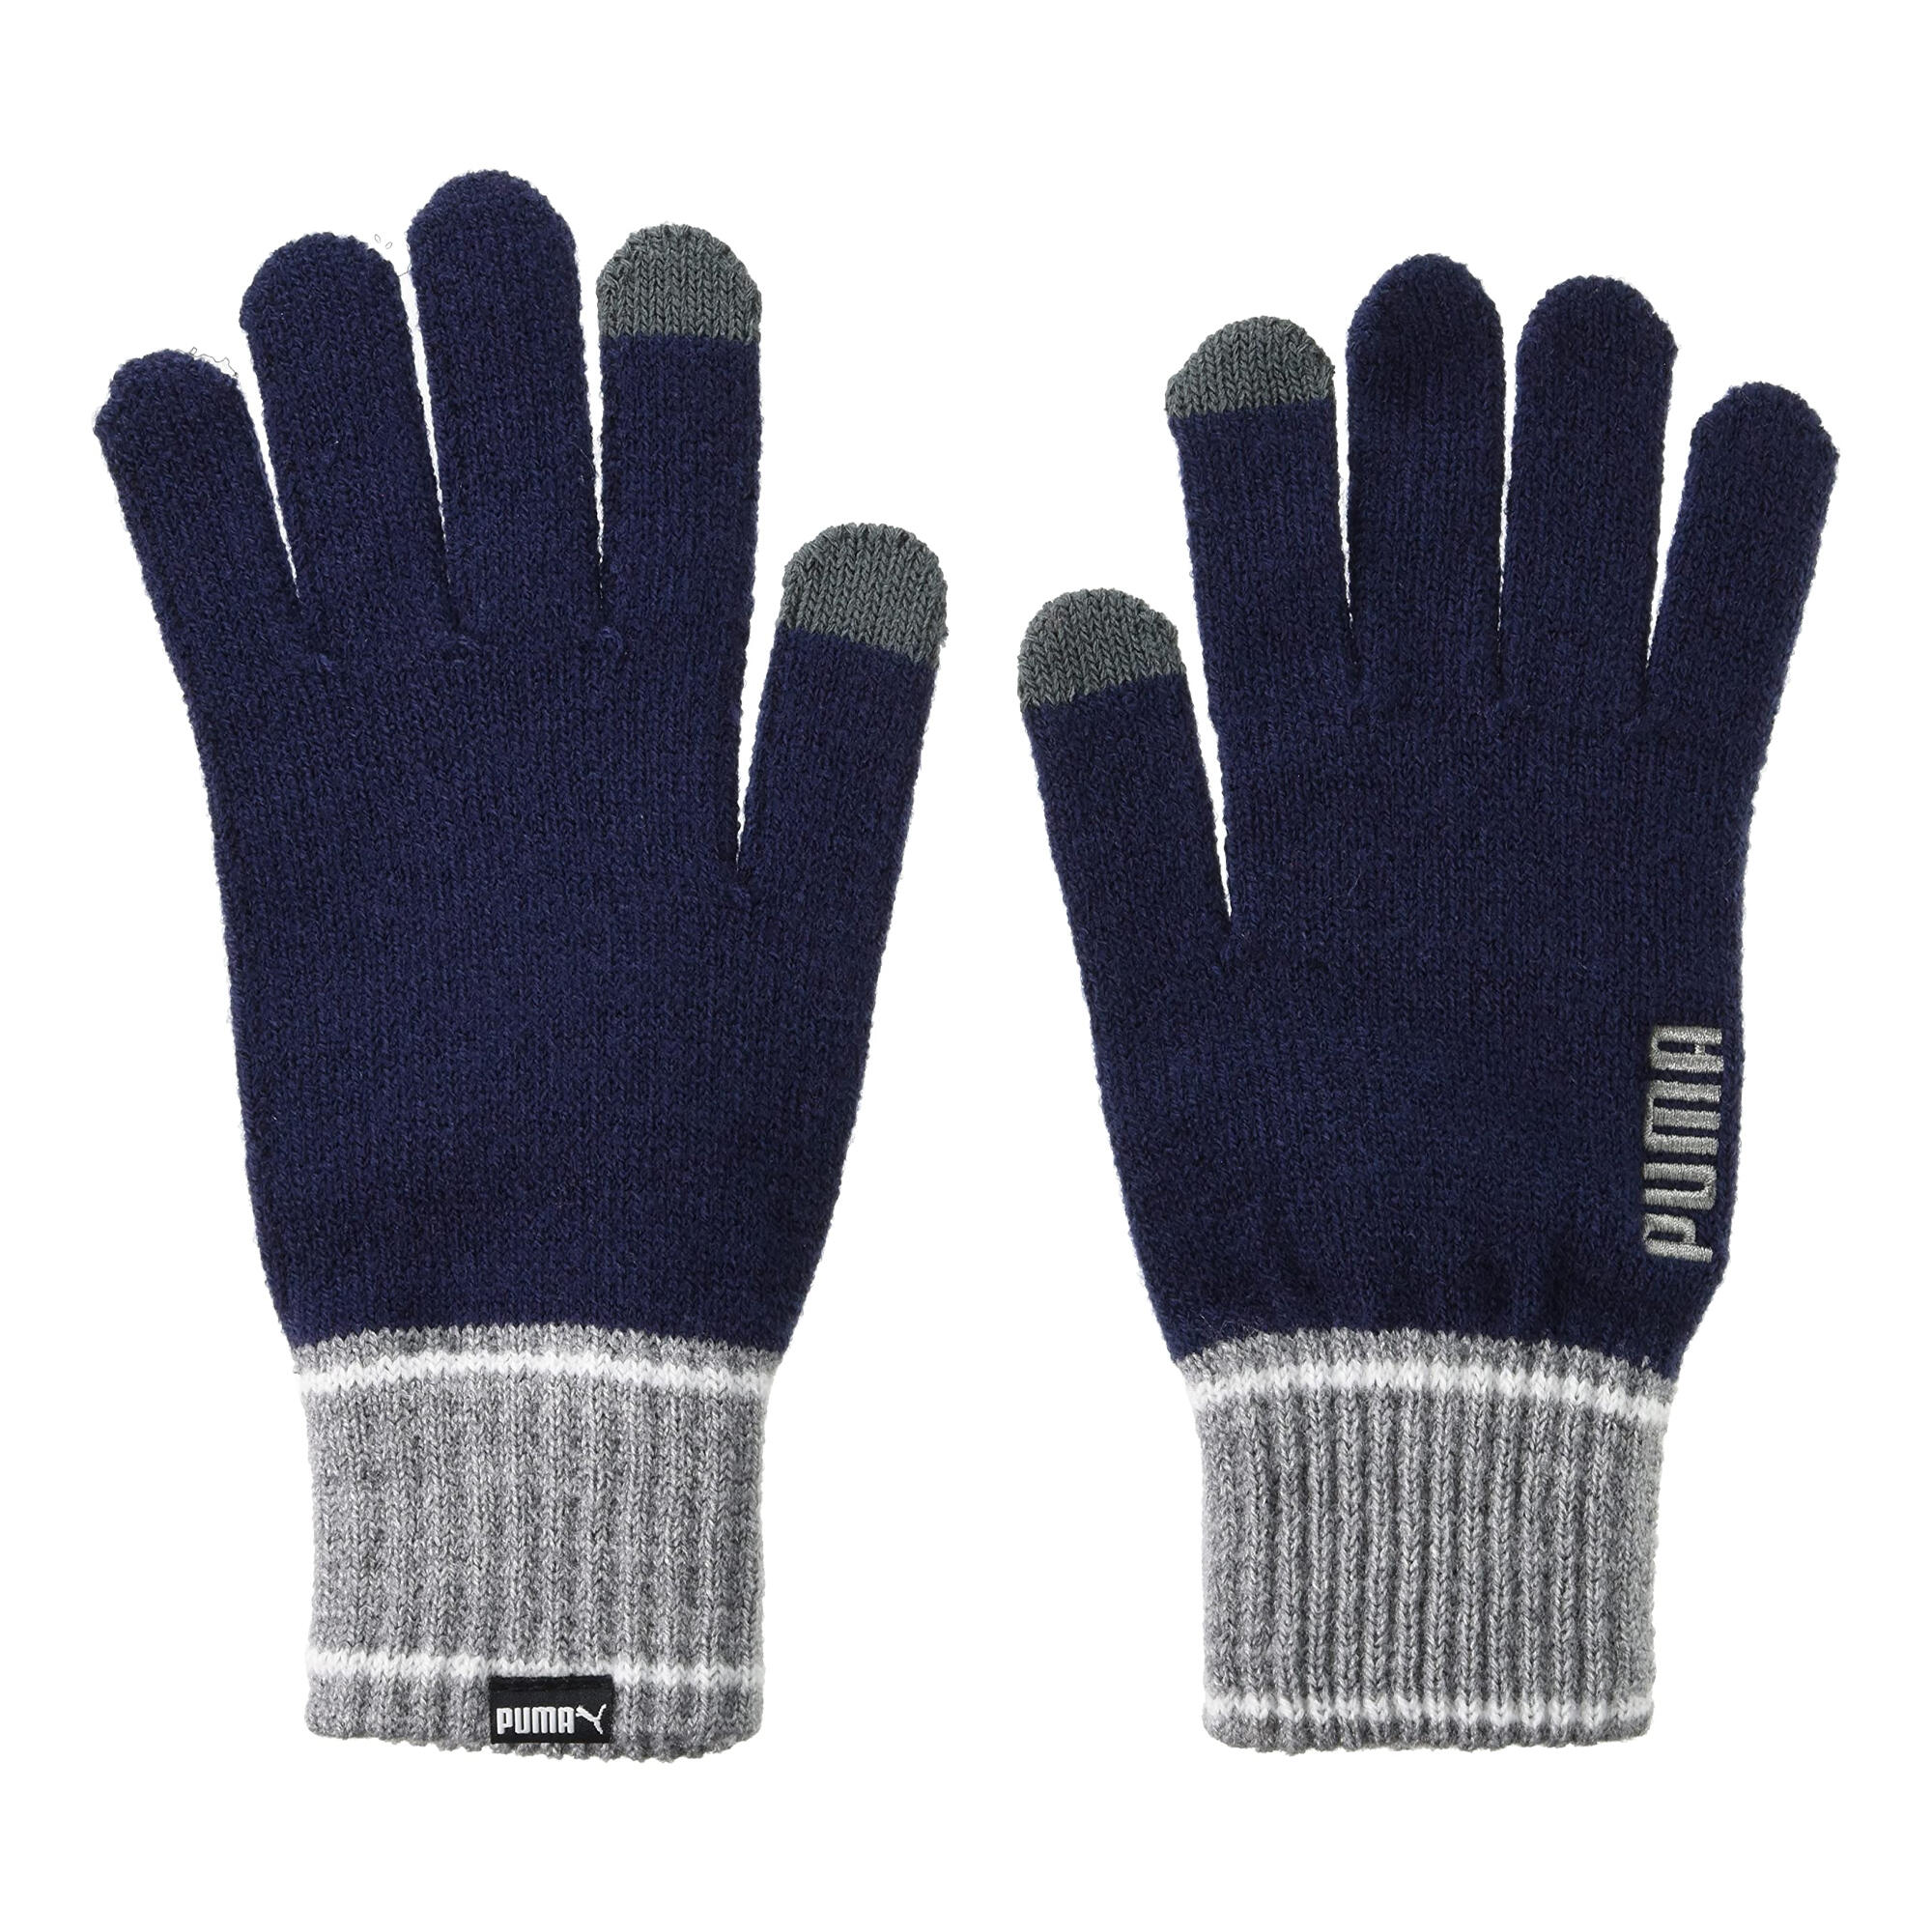 Unisex Adult Knitted Winter Gloves (Peacoat/Grey Heather) 1/3